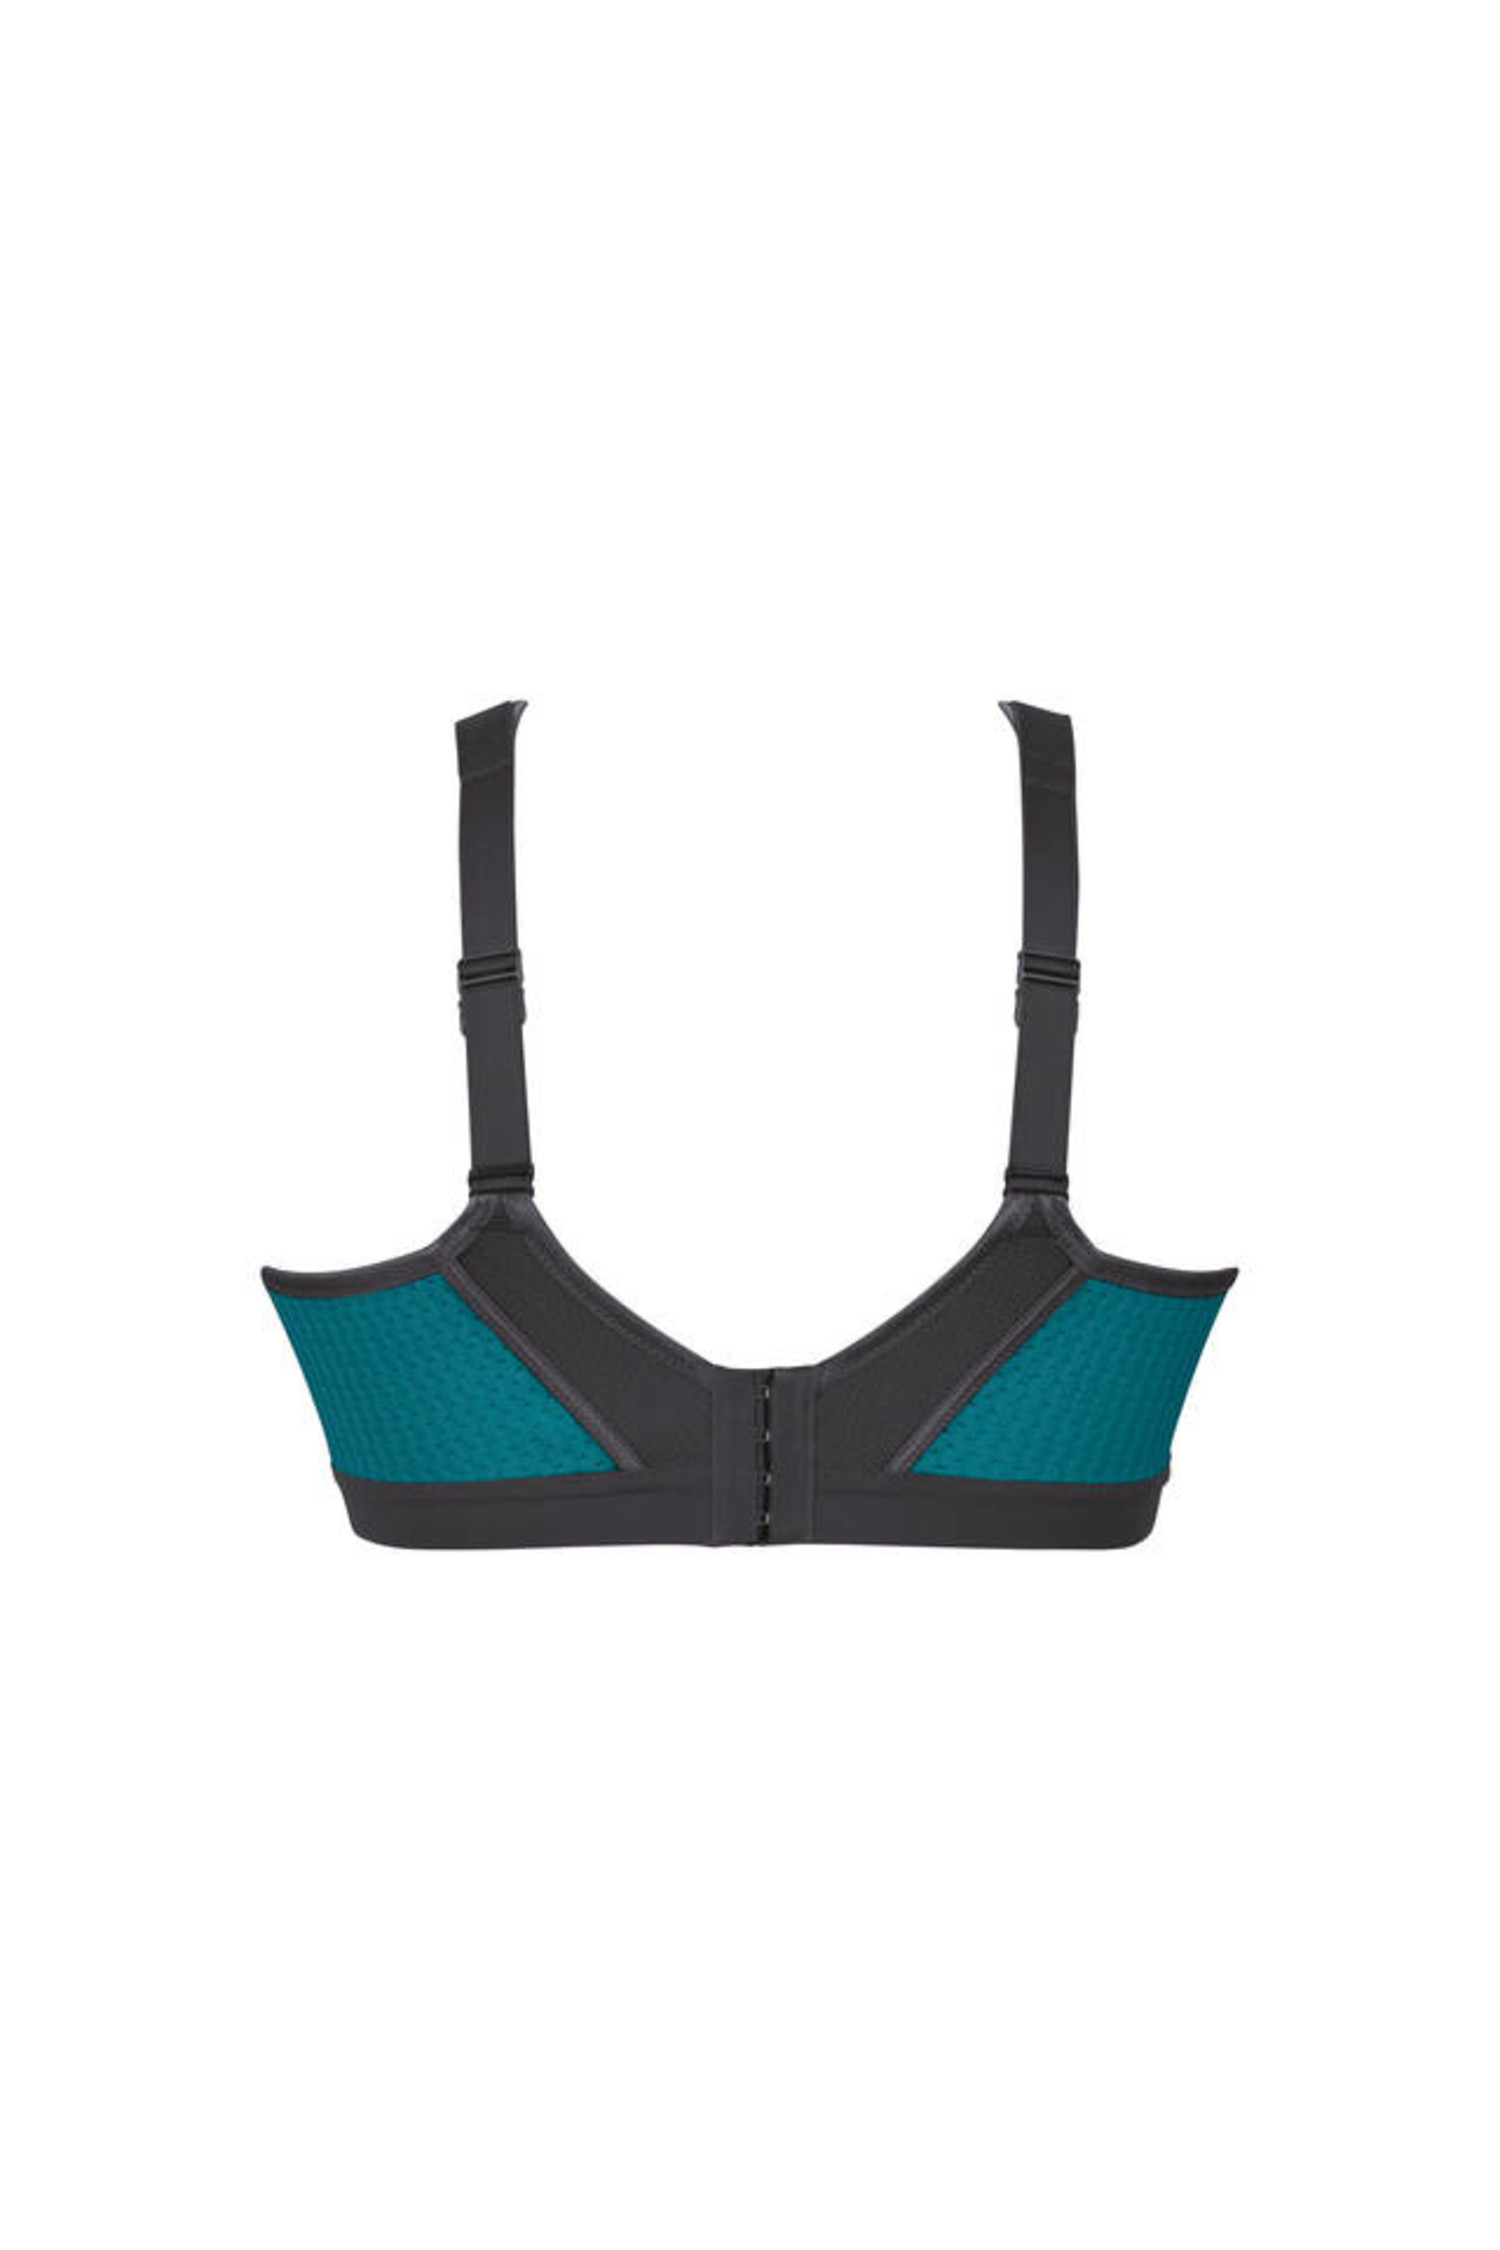 Extreme Control Plus Sport Bra Peacock/Anthracite 5567 - Lace & Day